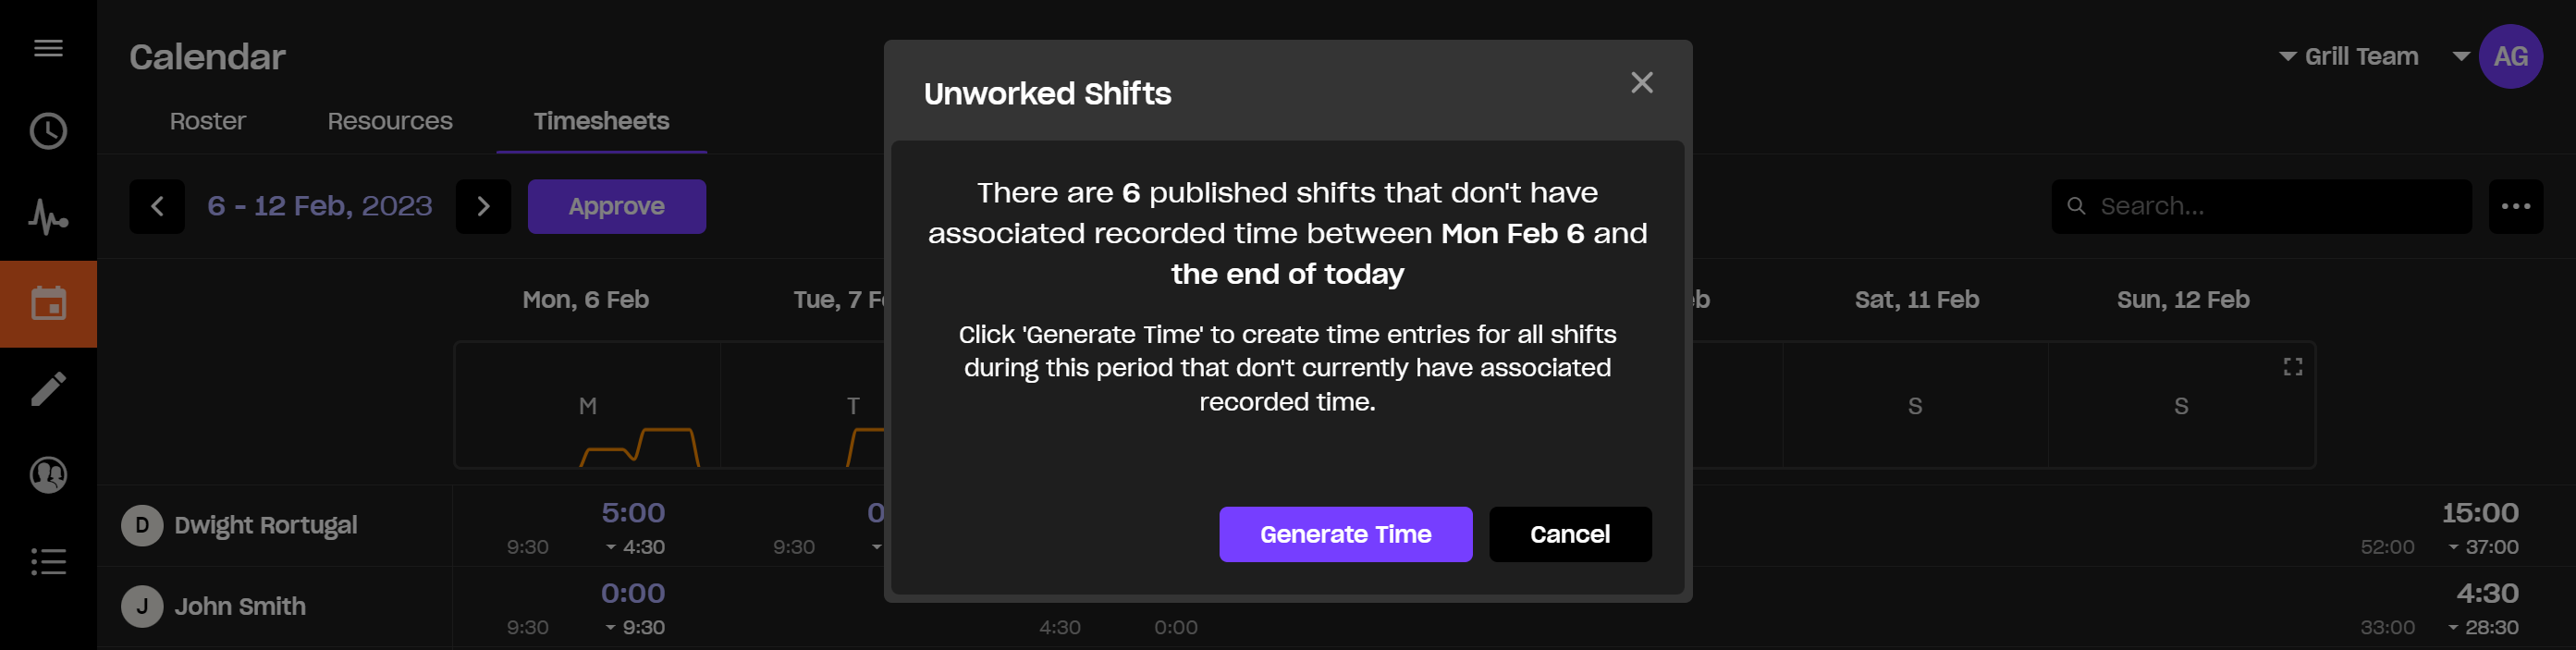 Timesheet_View_-_Generate_Time_For_Unworked_Shifts.png